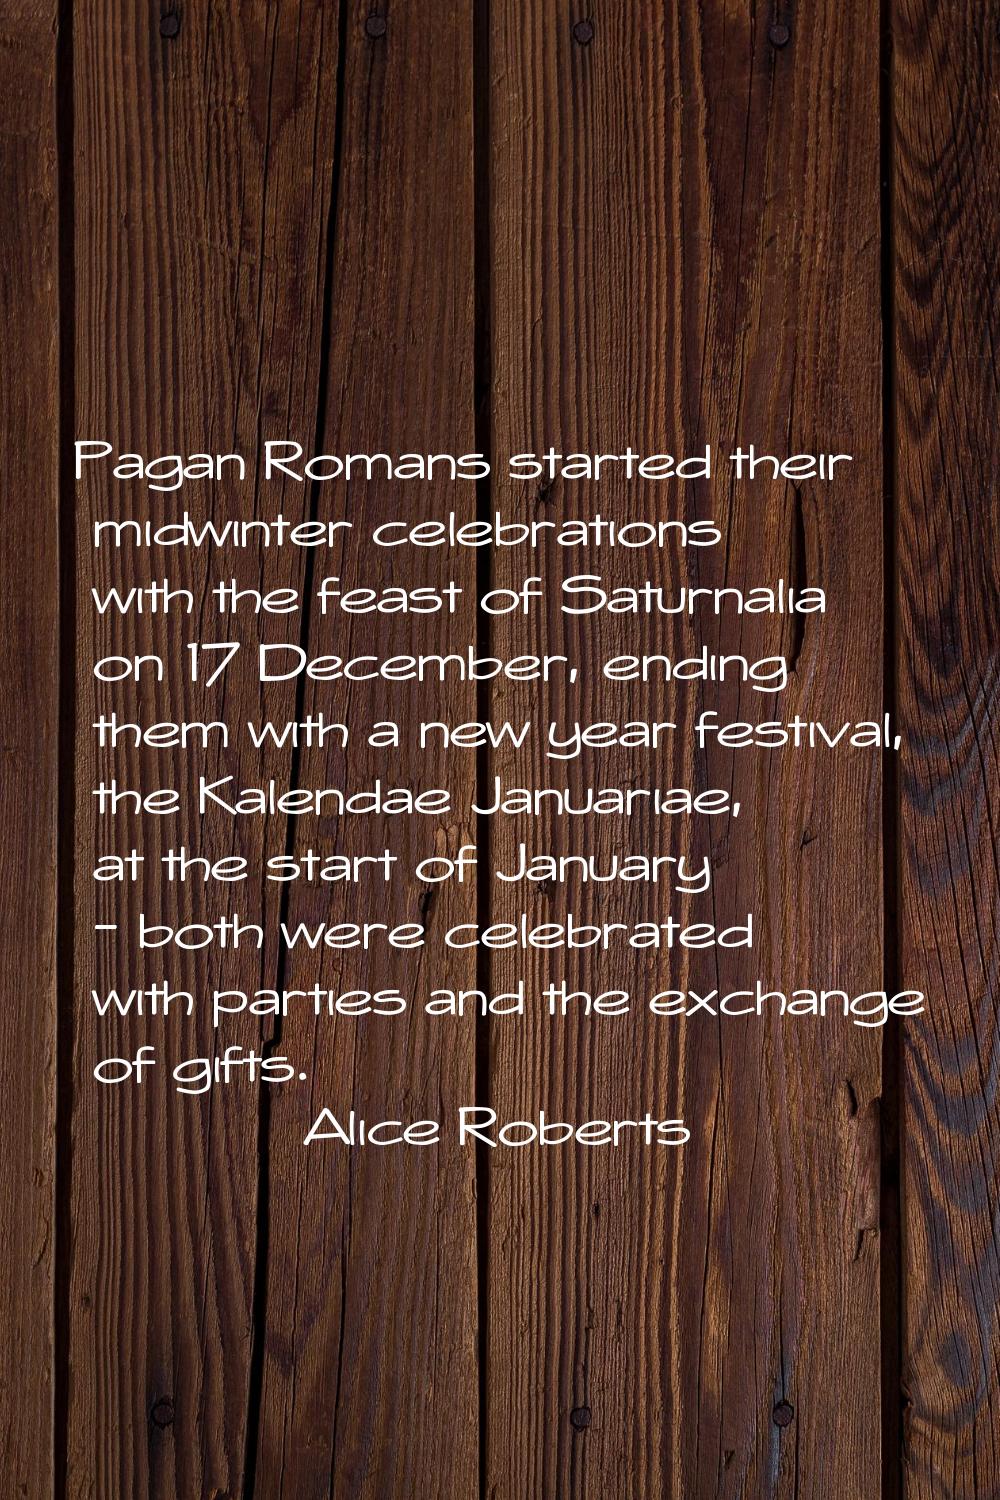 Pagan Romans started their midwinter celebrations with the feast of Saturnalia on 17 December, endi